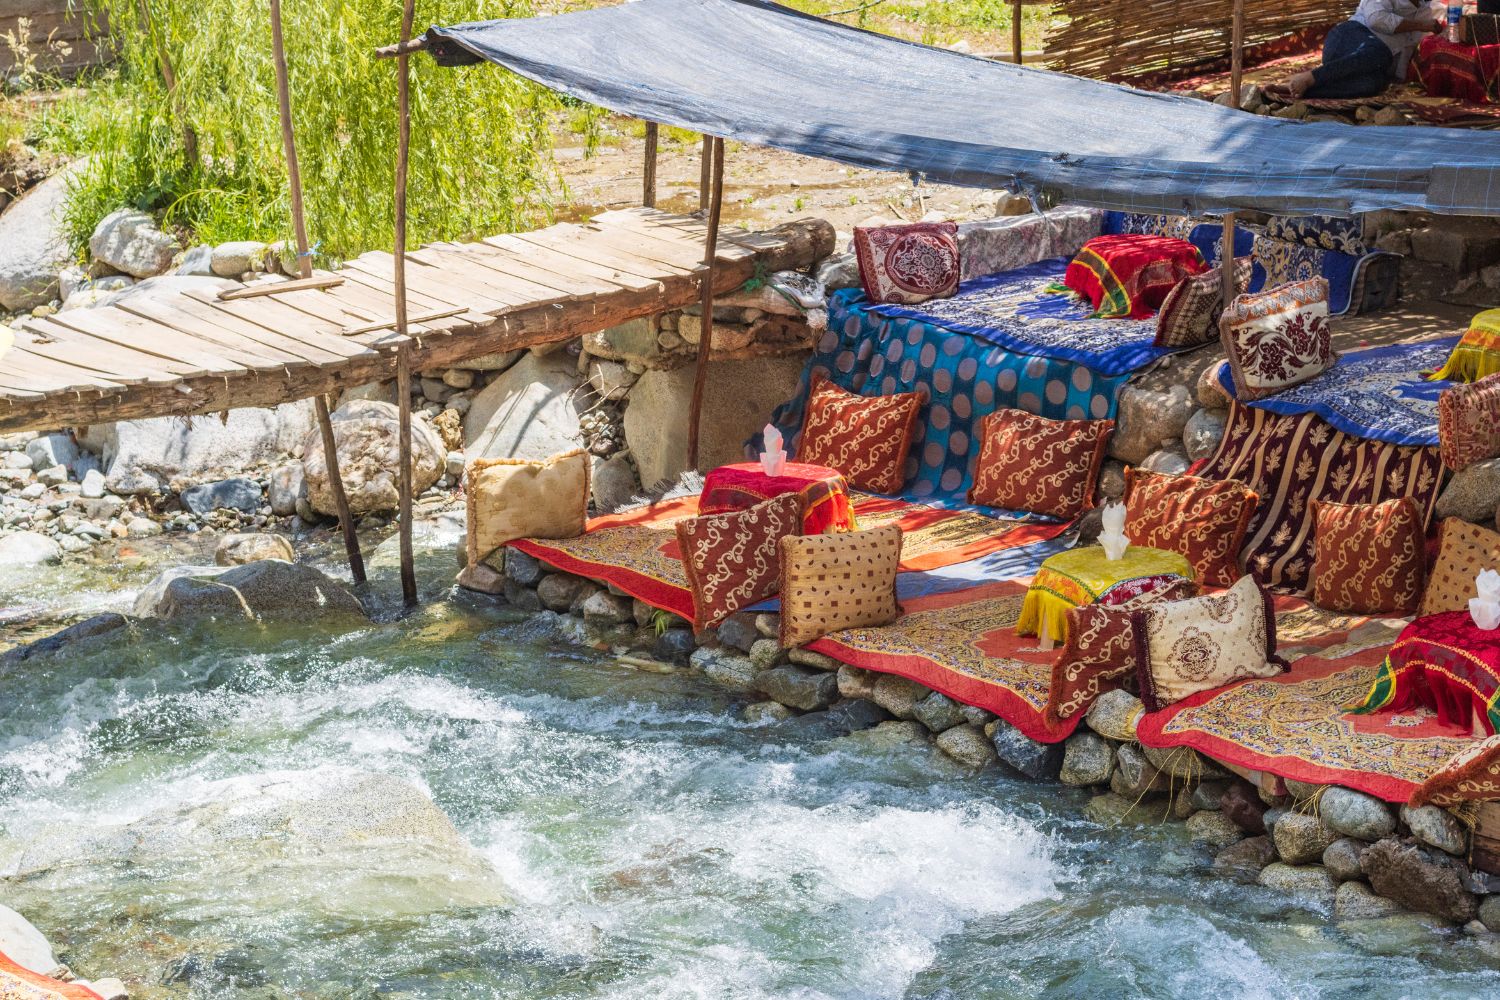 Restaurant on Ourika River at Atlas Mountains, Morocco